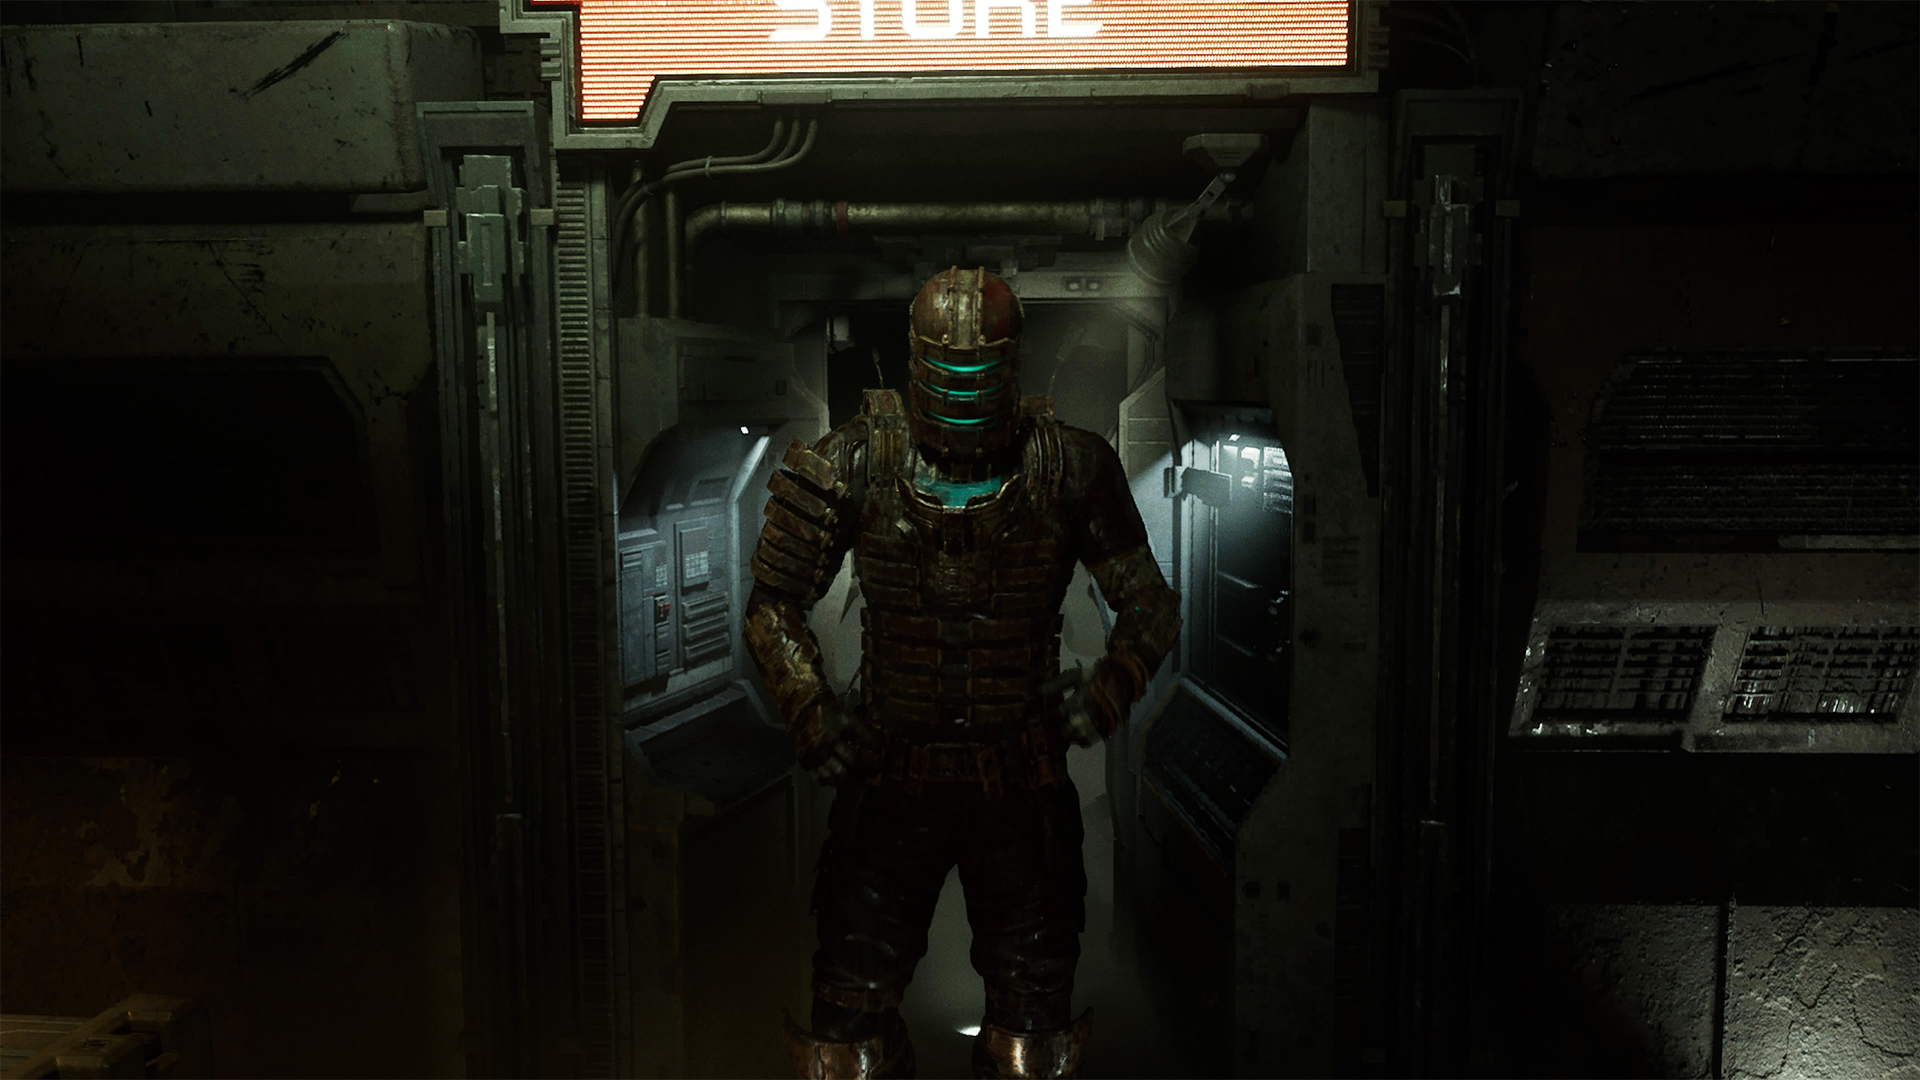 Dead Space Remake Deluxe Edition Suits: How To Equip DLC Armor